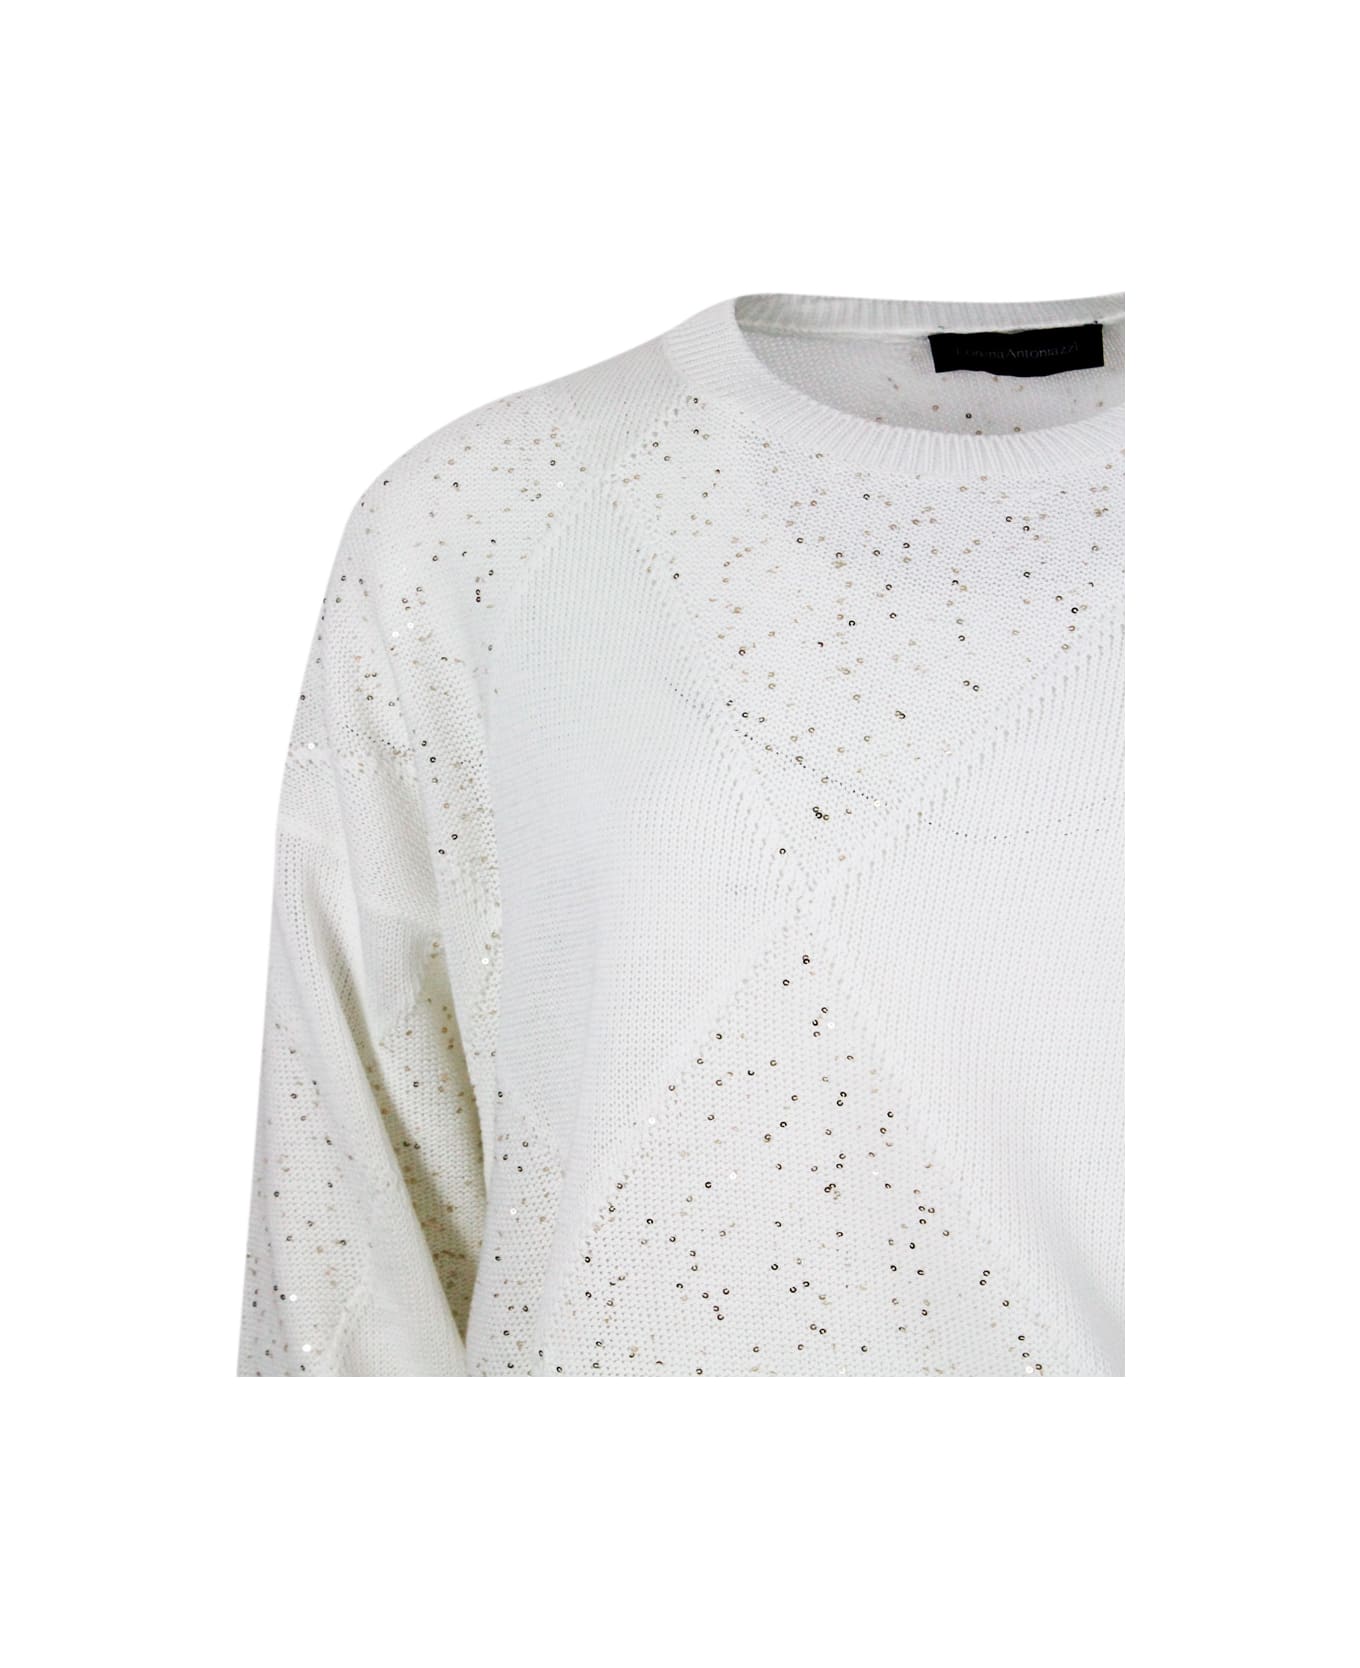 Lorena Antoniazzi Long-sleeved Crew-neck Sweater In Cotton Thread With Diamond Pattern Embellished With Microsequins - White